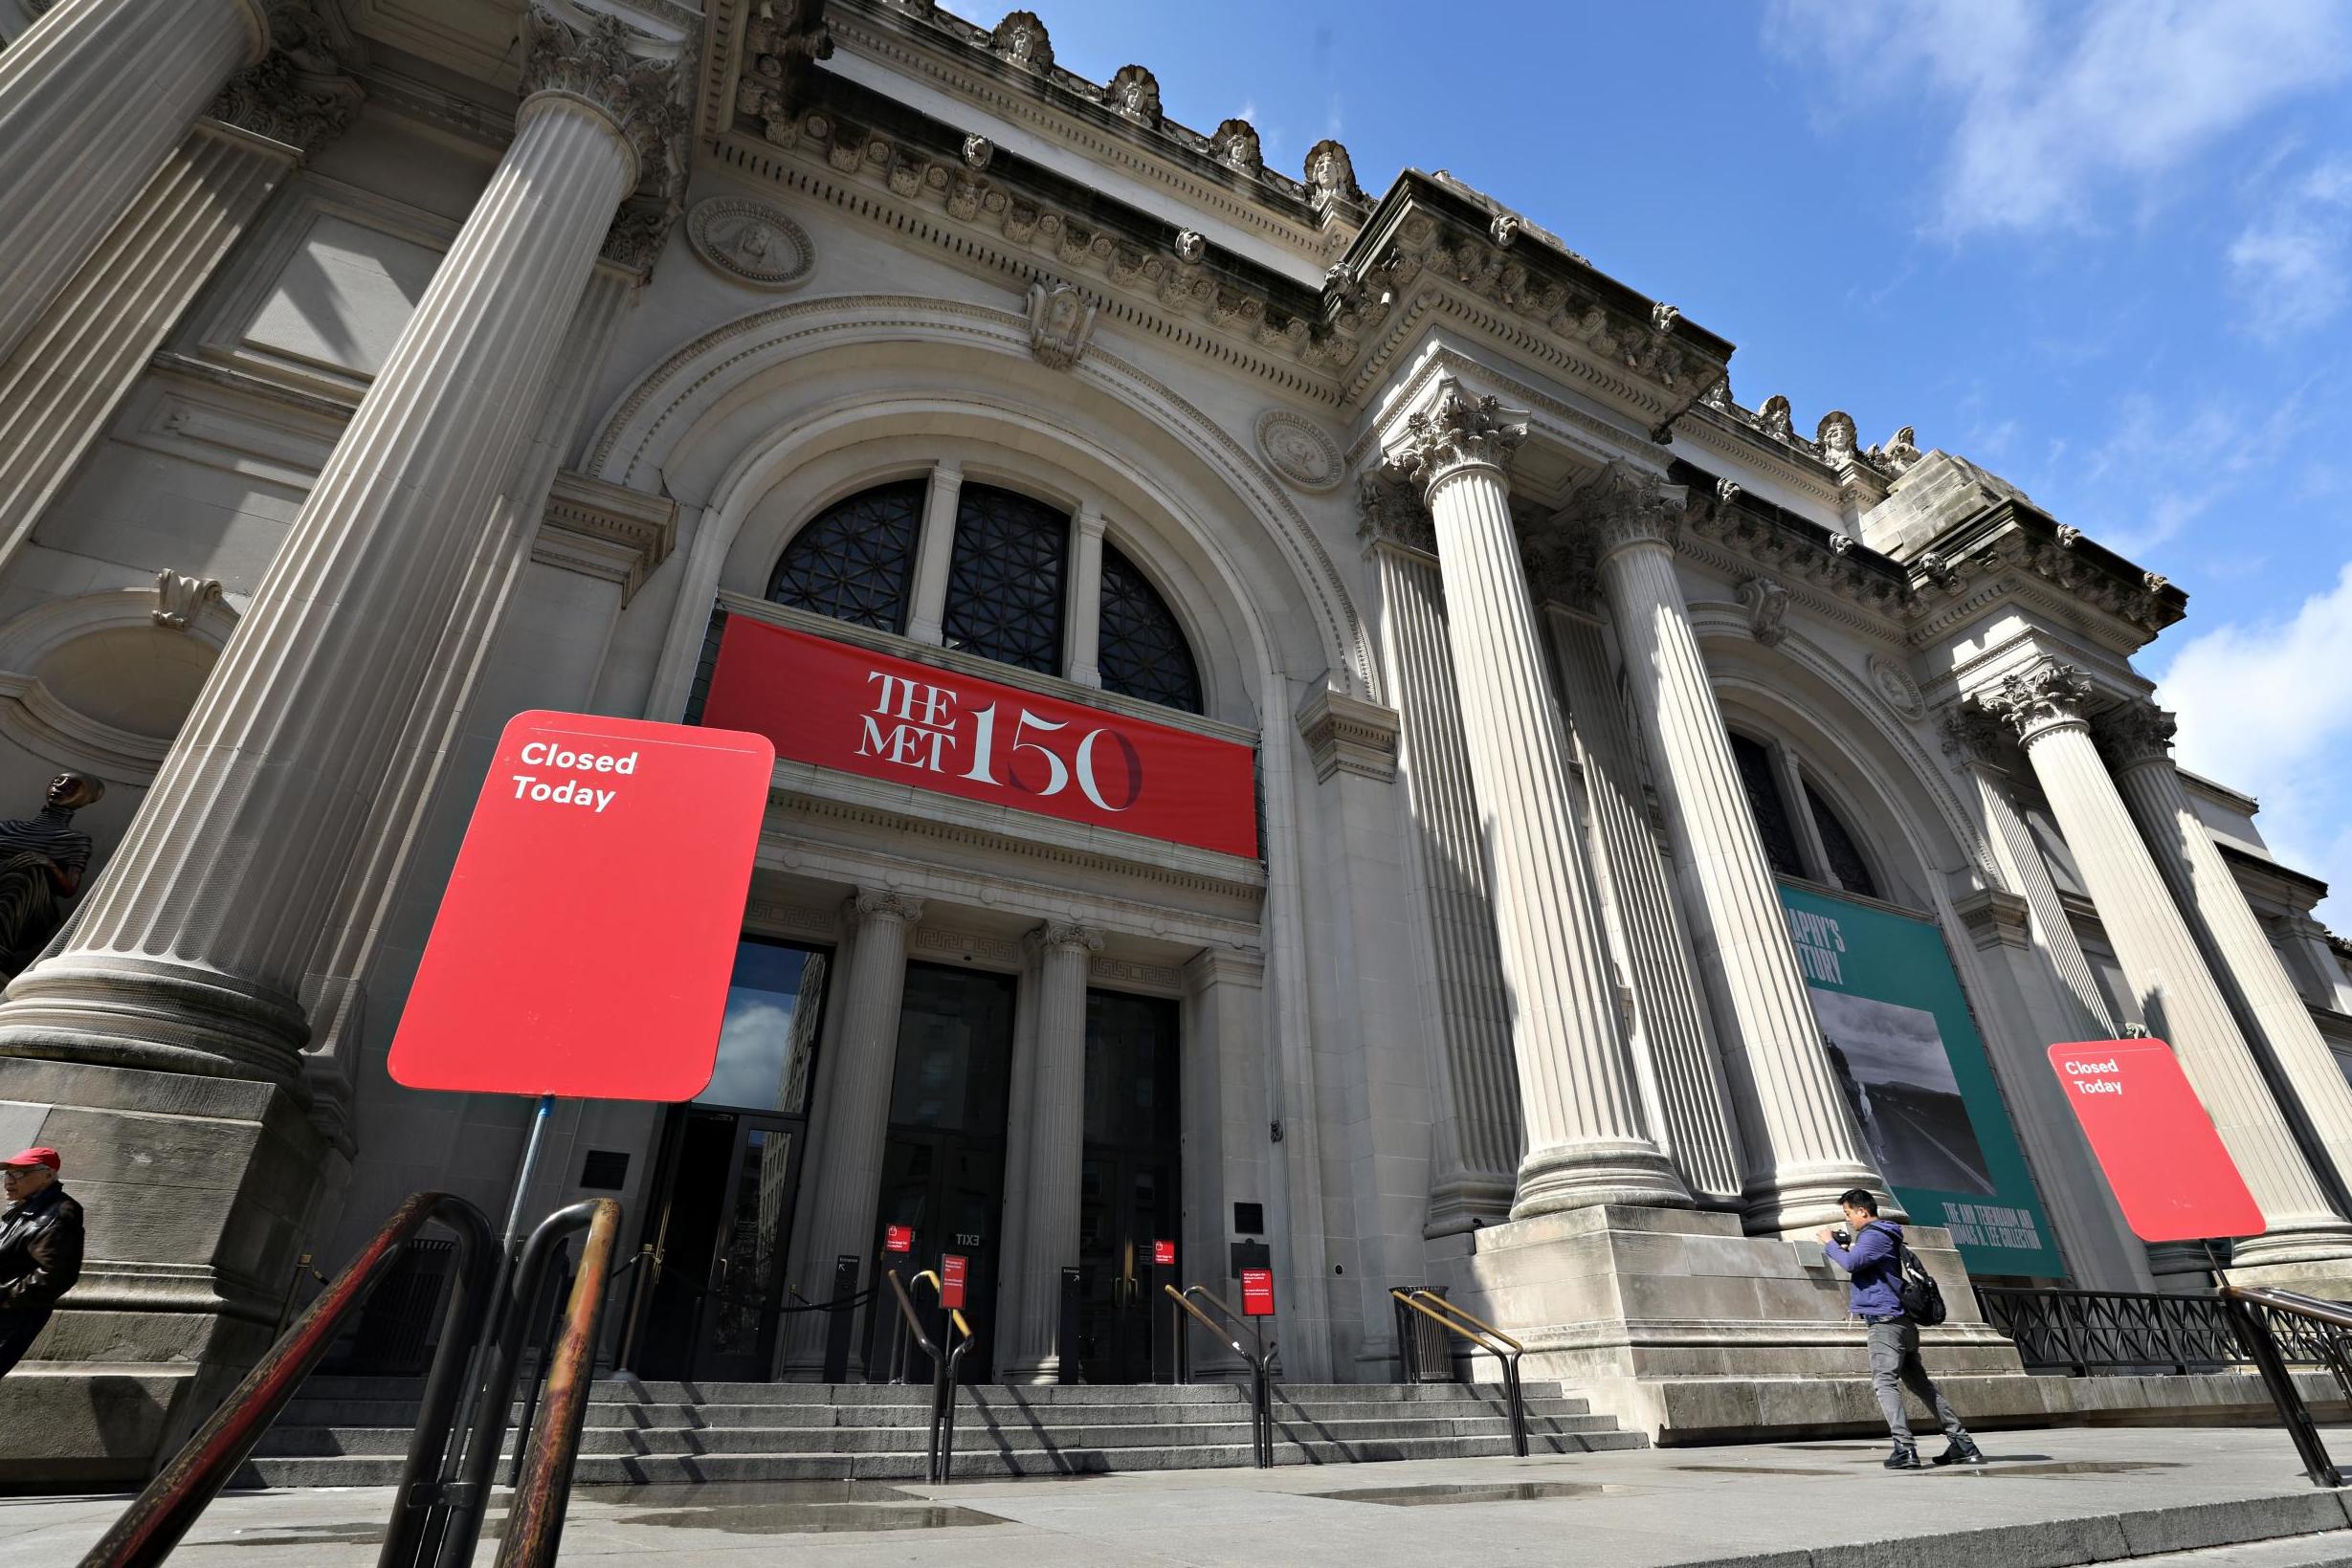 The Met Museum closed in New York City on 13 March.